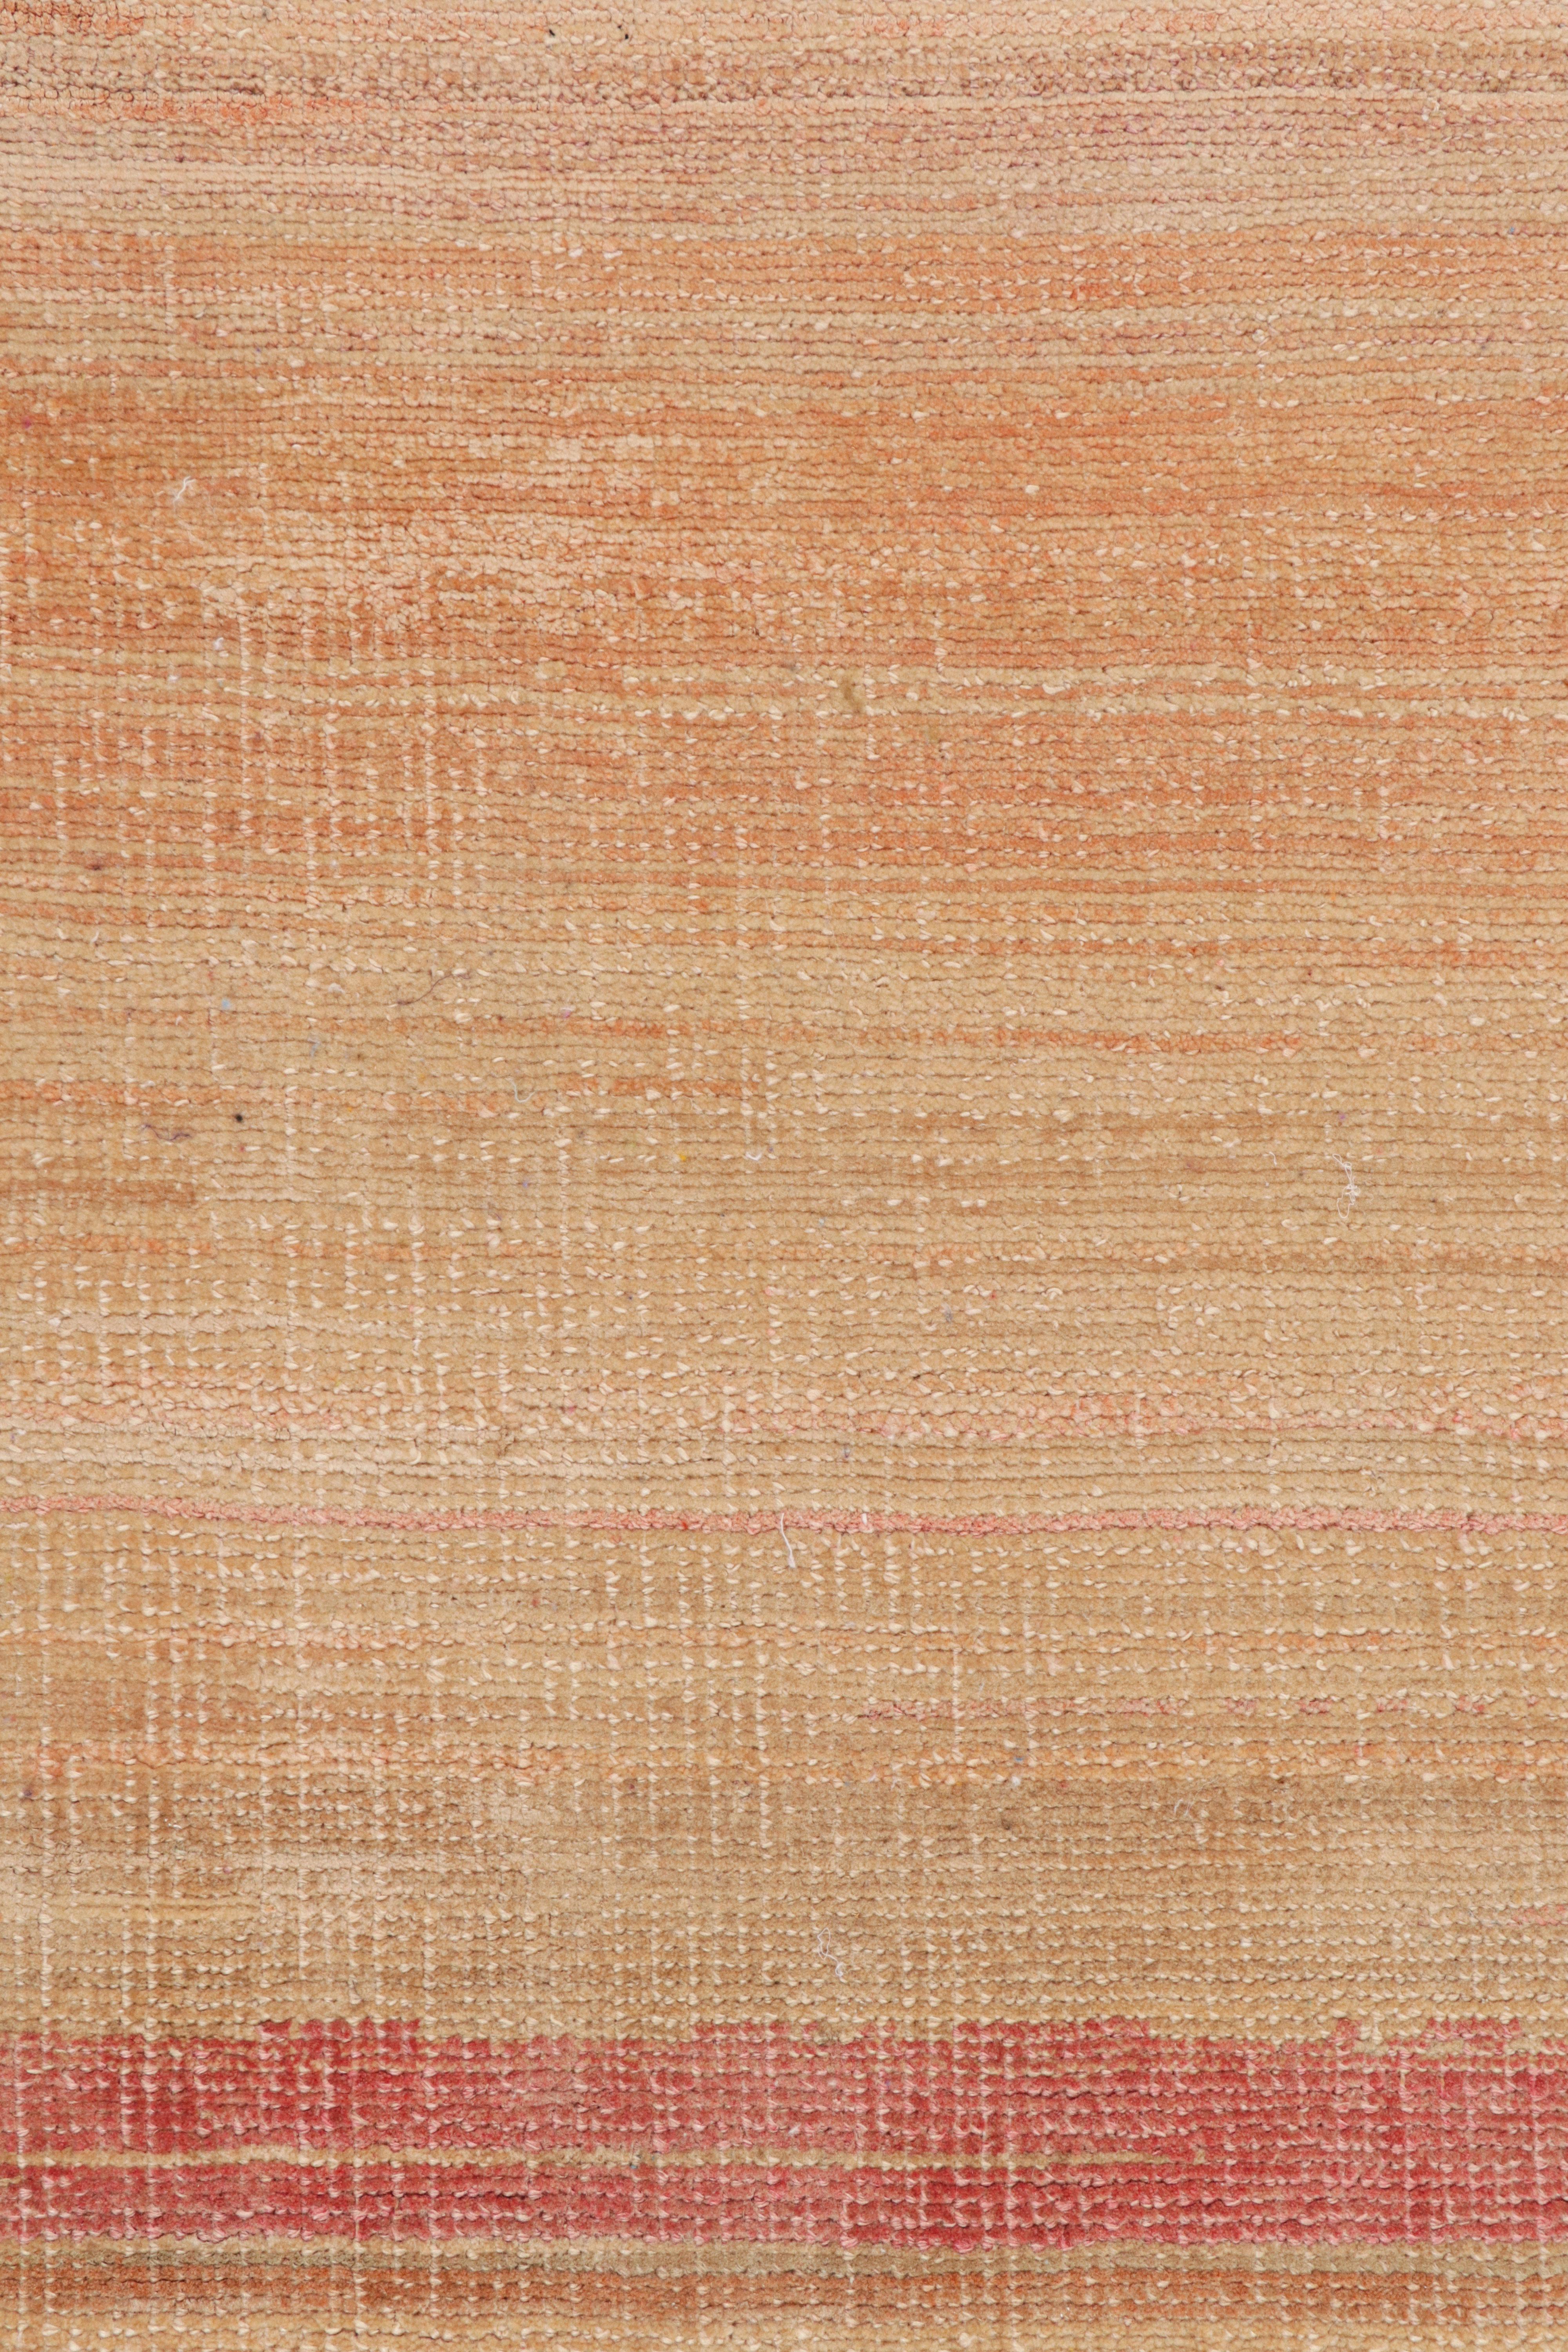 Modern Rug & Kilim’s Textural Rug in Peach Tones and Striae For Sale